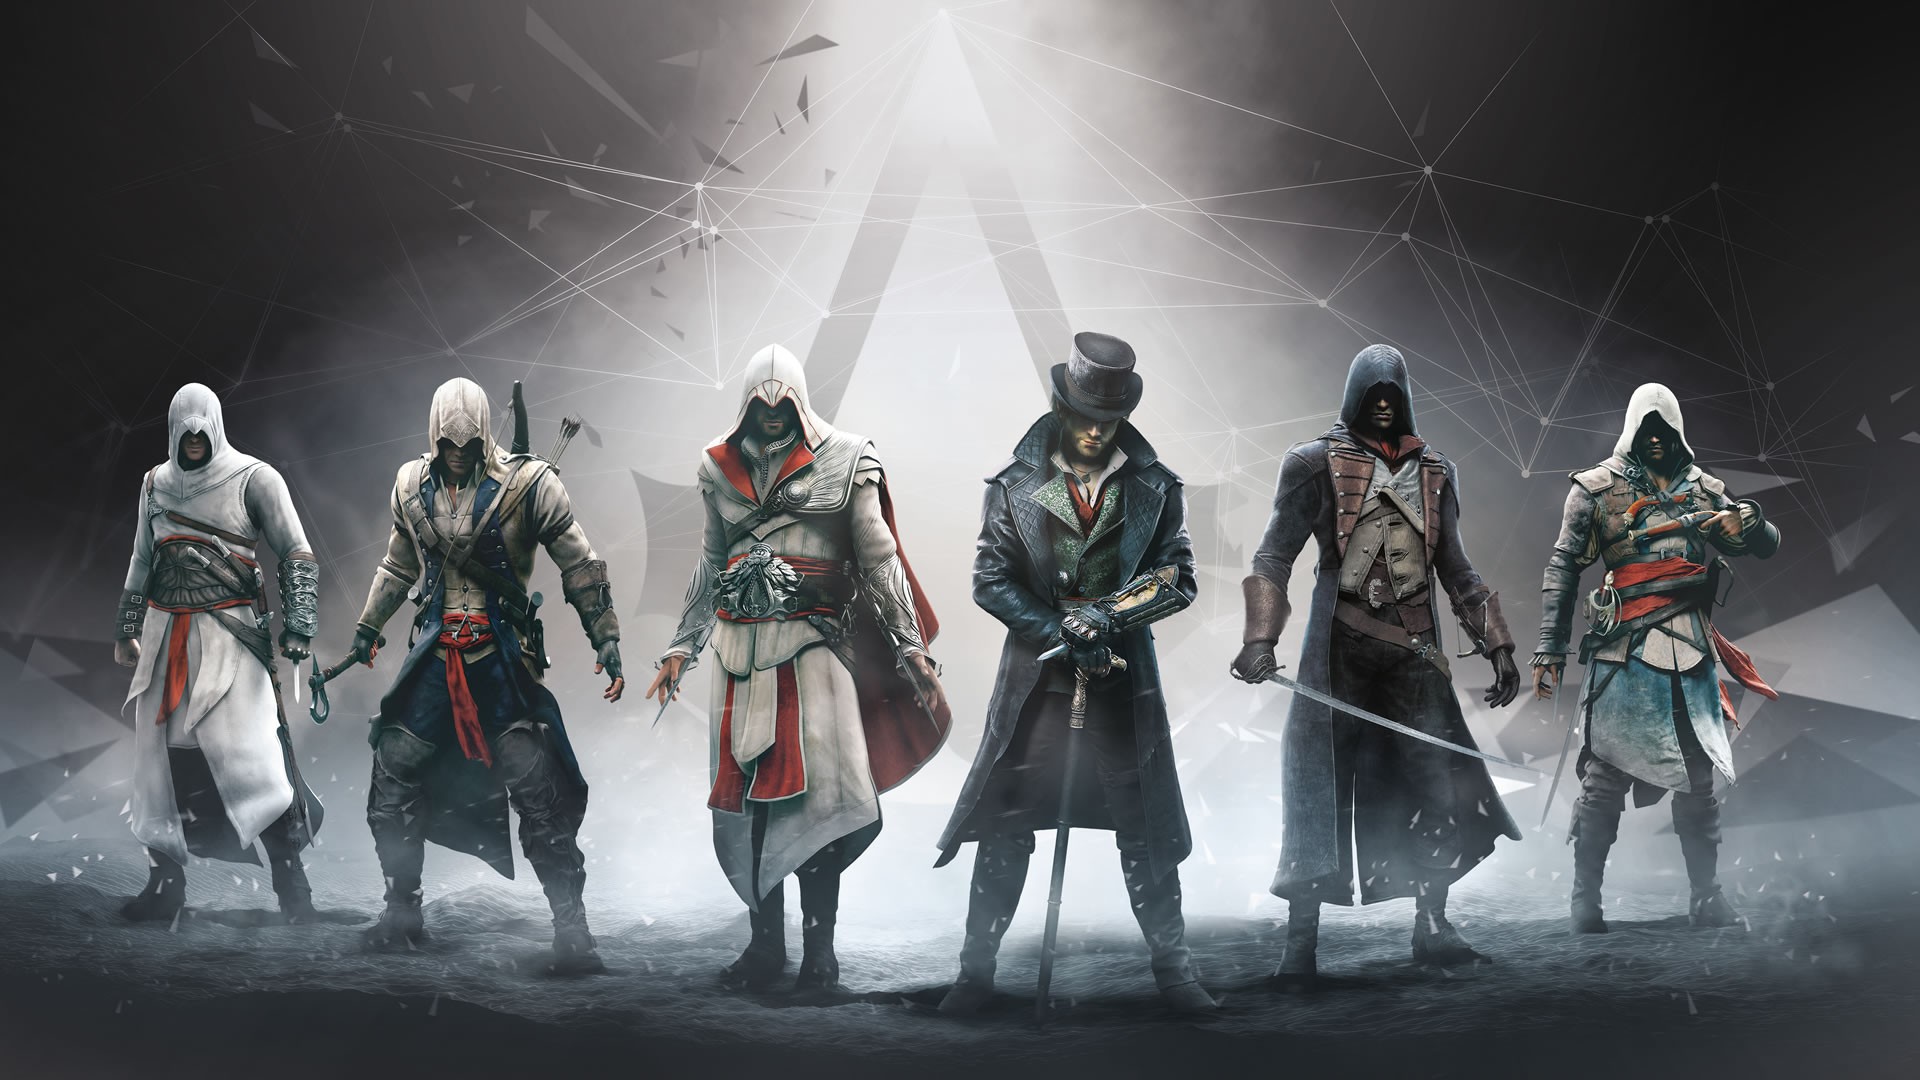 Video Games Assassins Creed Syndicate Assassins Creed Assassins Creed Unity Assassins Creed Brotherh 1920x1080